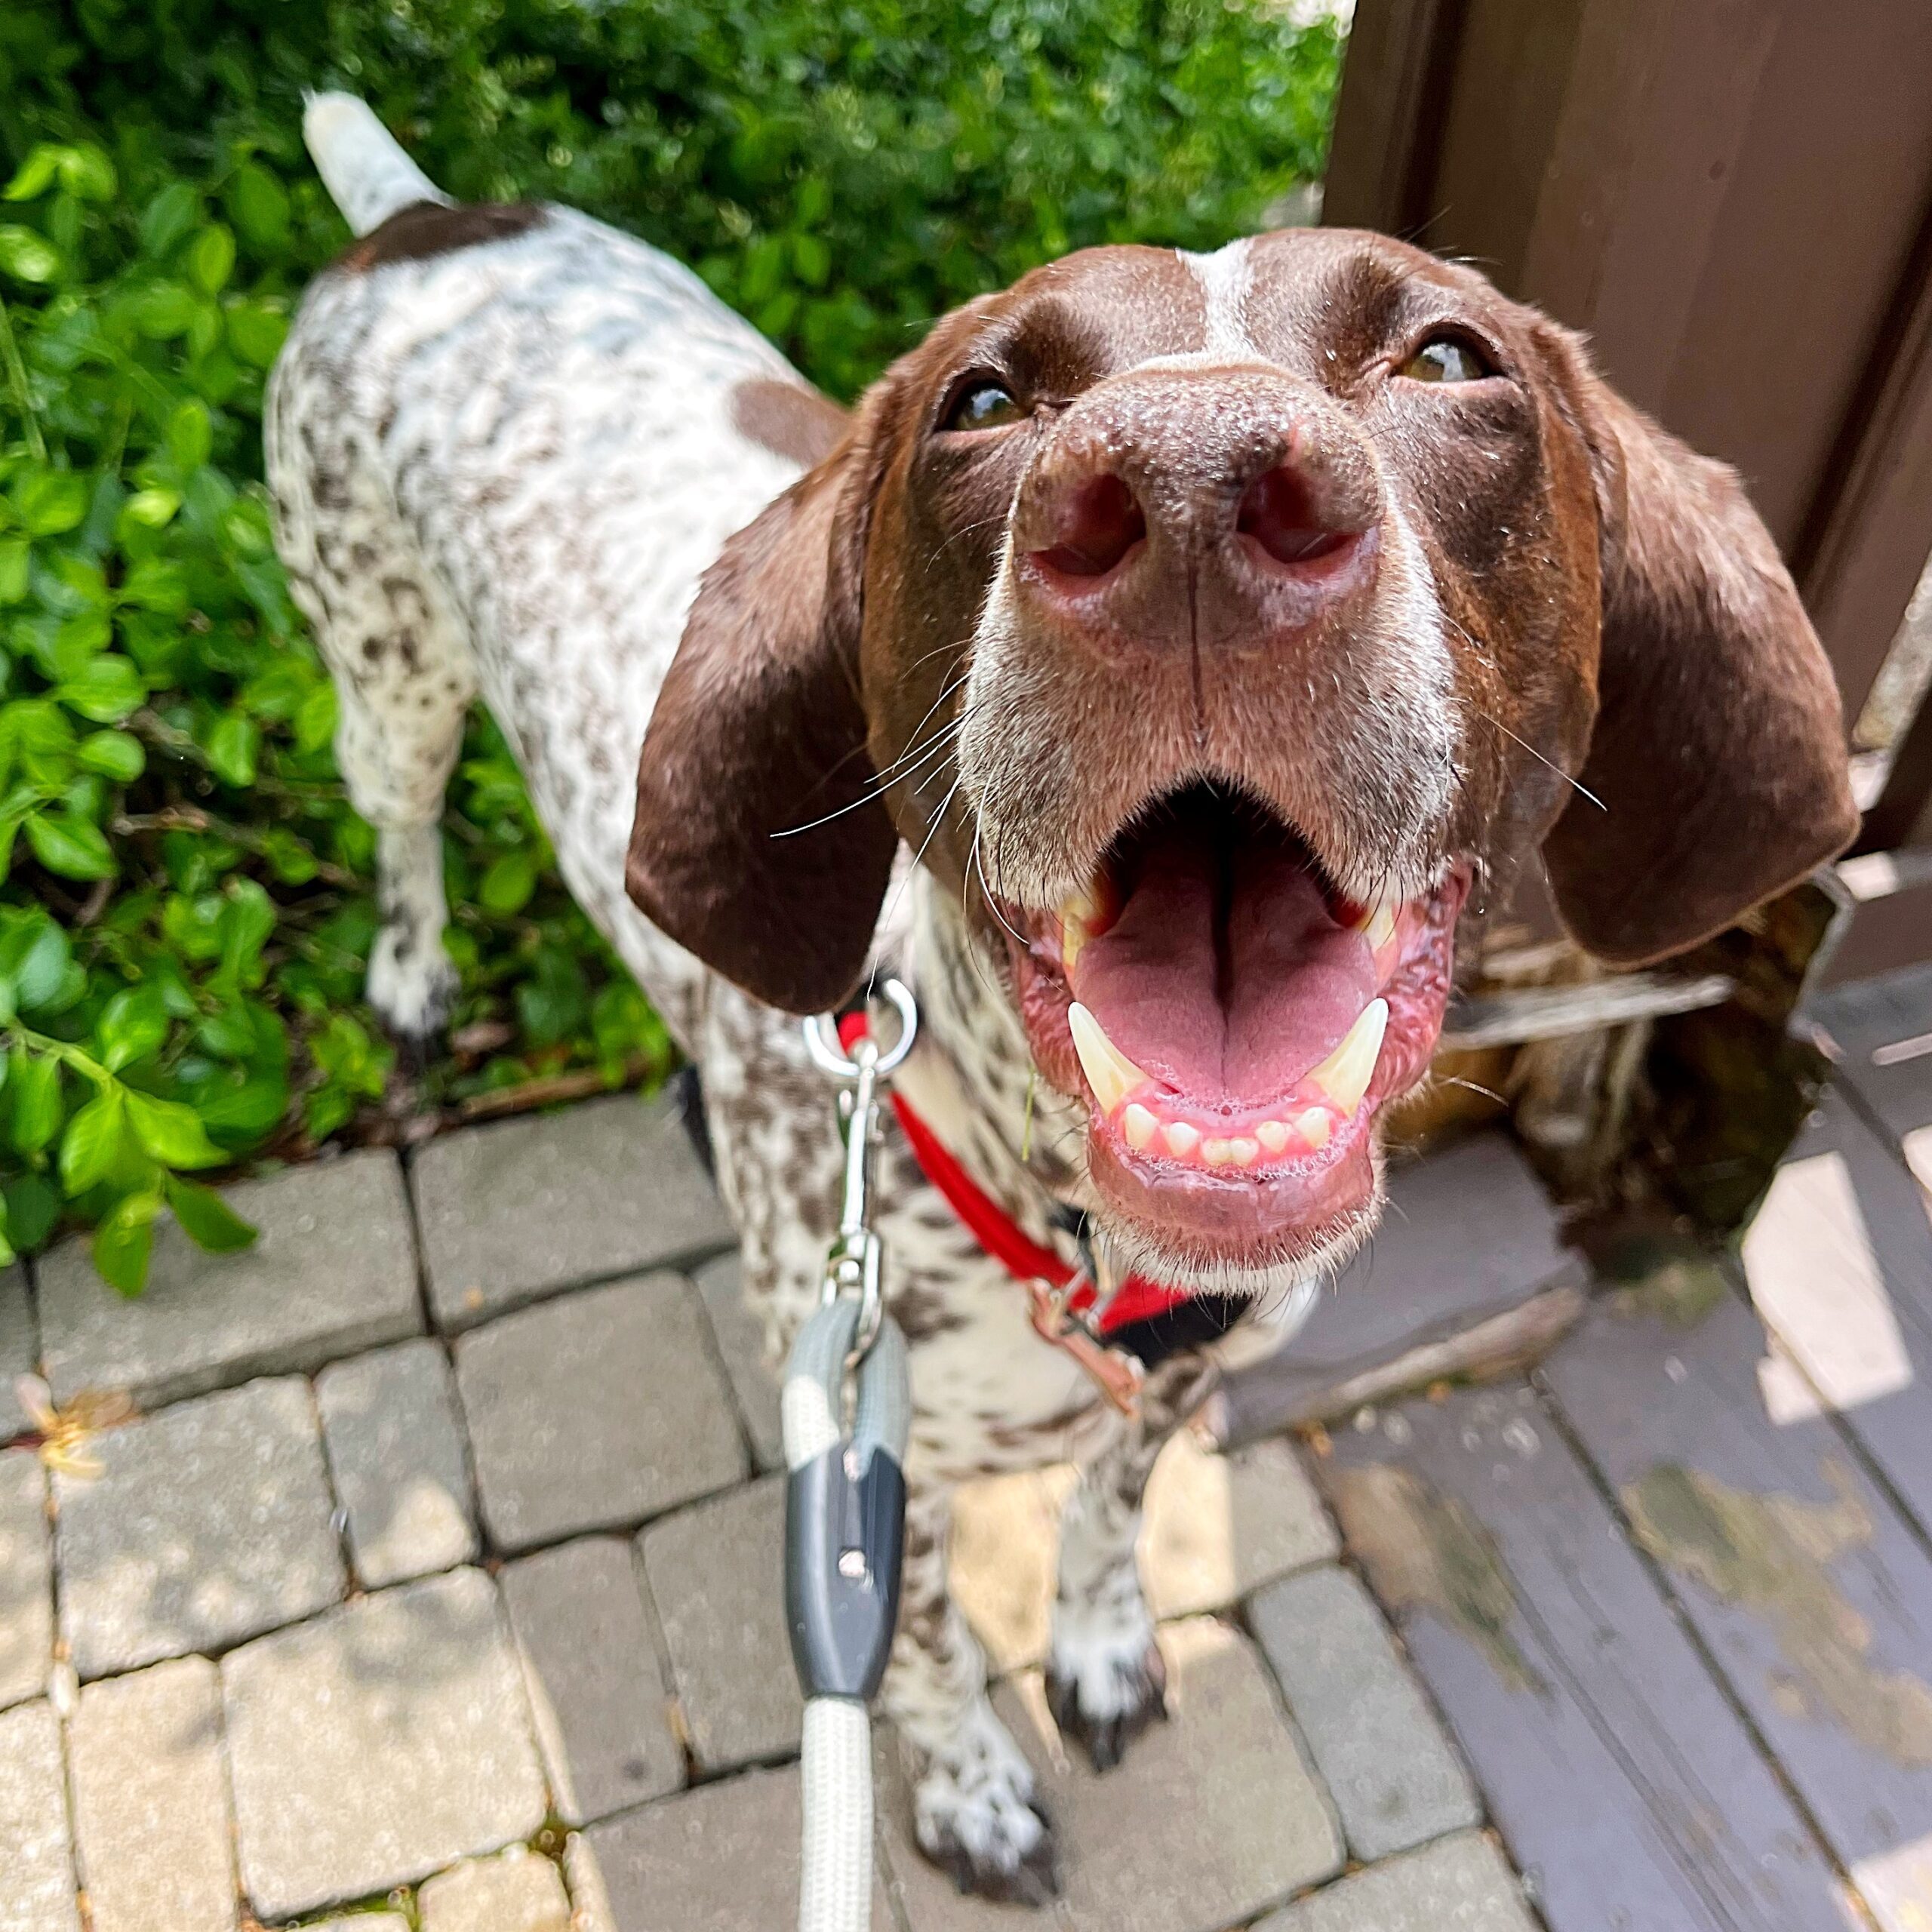 An image featuring a joyful dog with a big smile on its face. The dog is standing, radiating happiness and contentment.